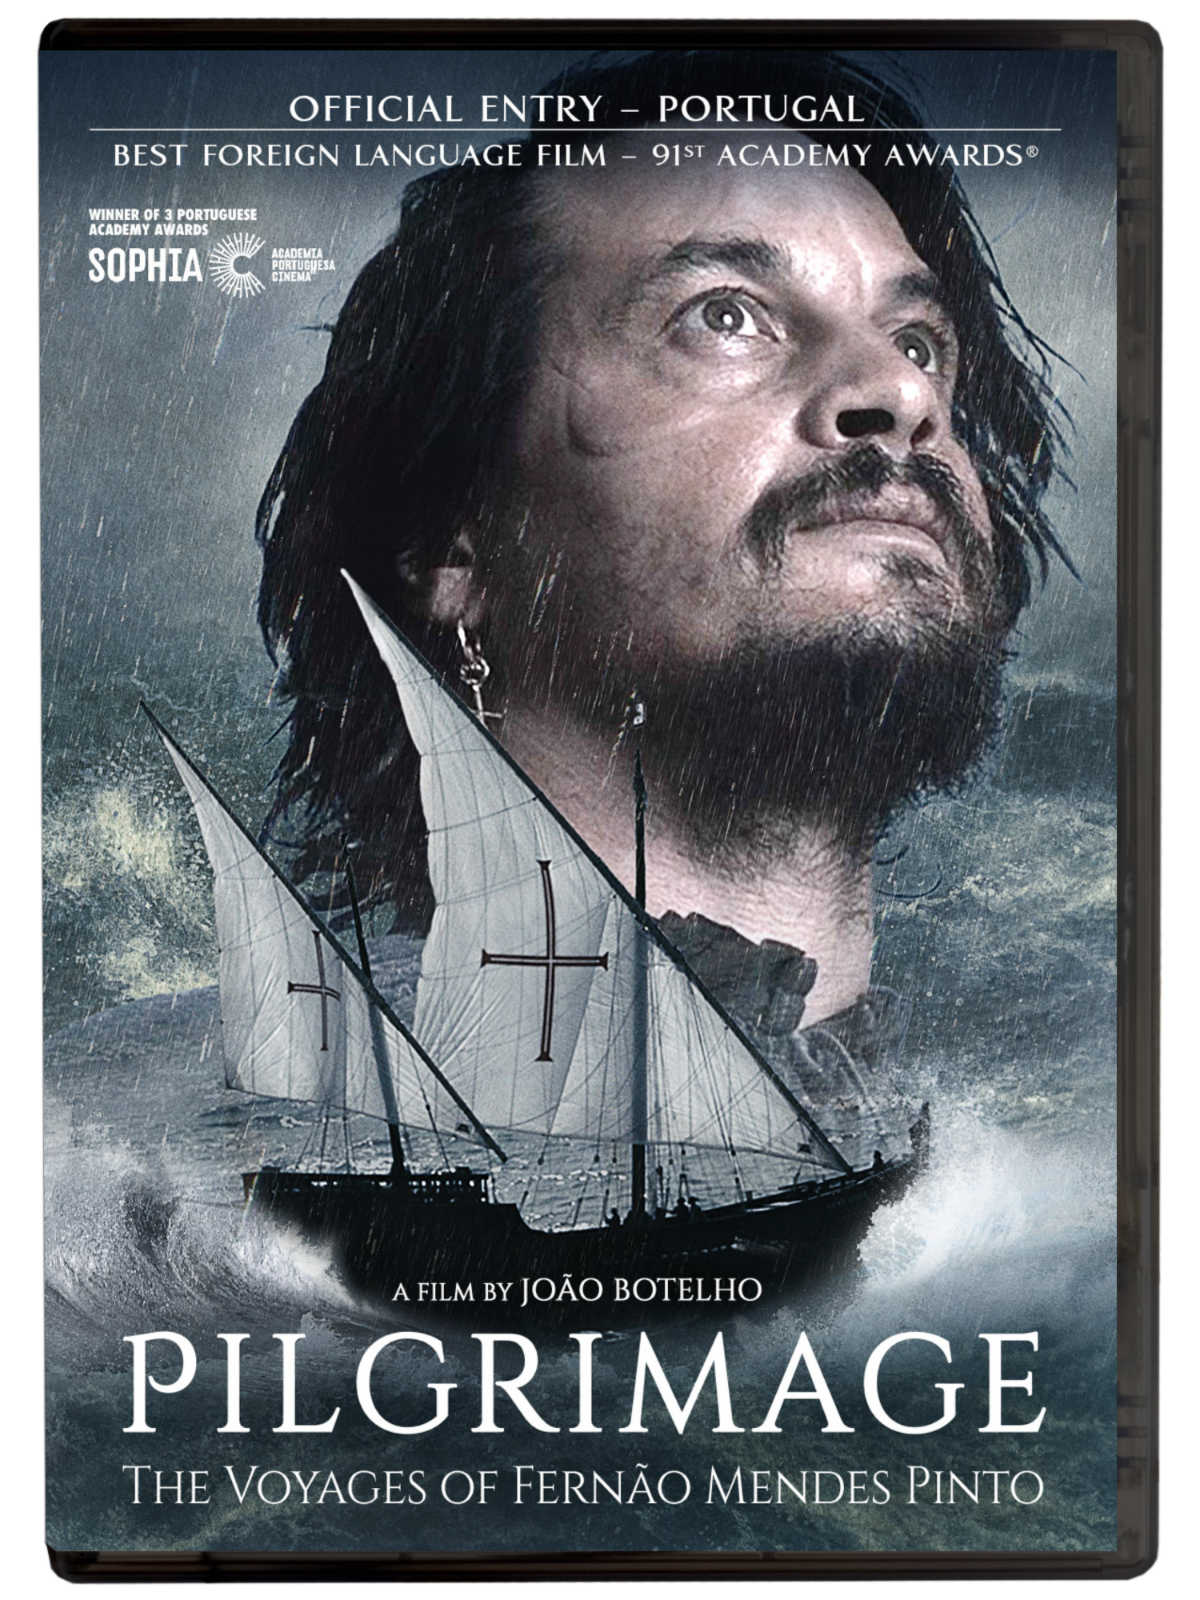 Watch the Portuguese Pilgrimage movie, so that you can see the adventurous voyages of Fernao Mendes Pinto brought to life. 